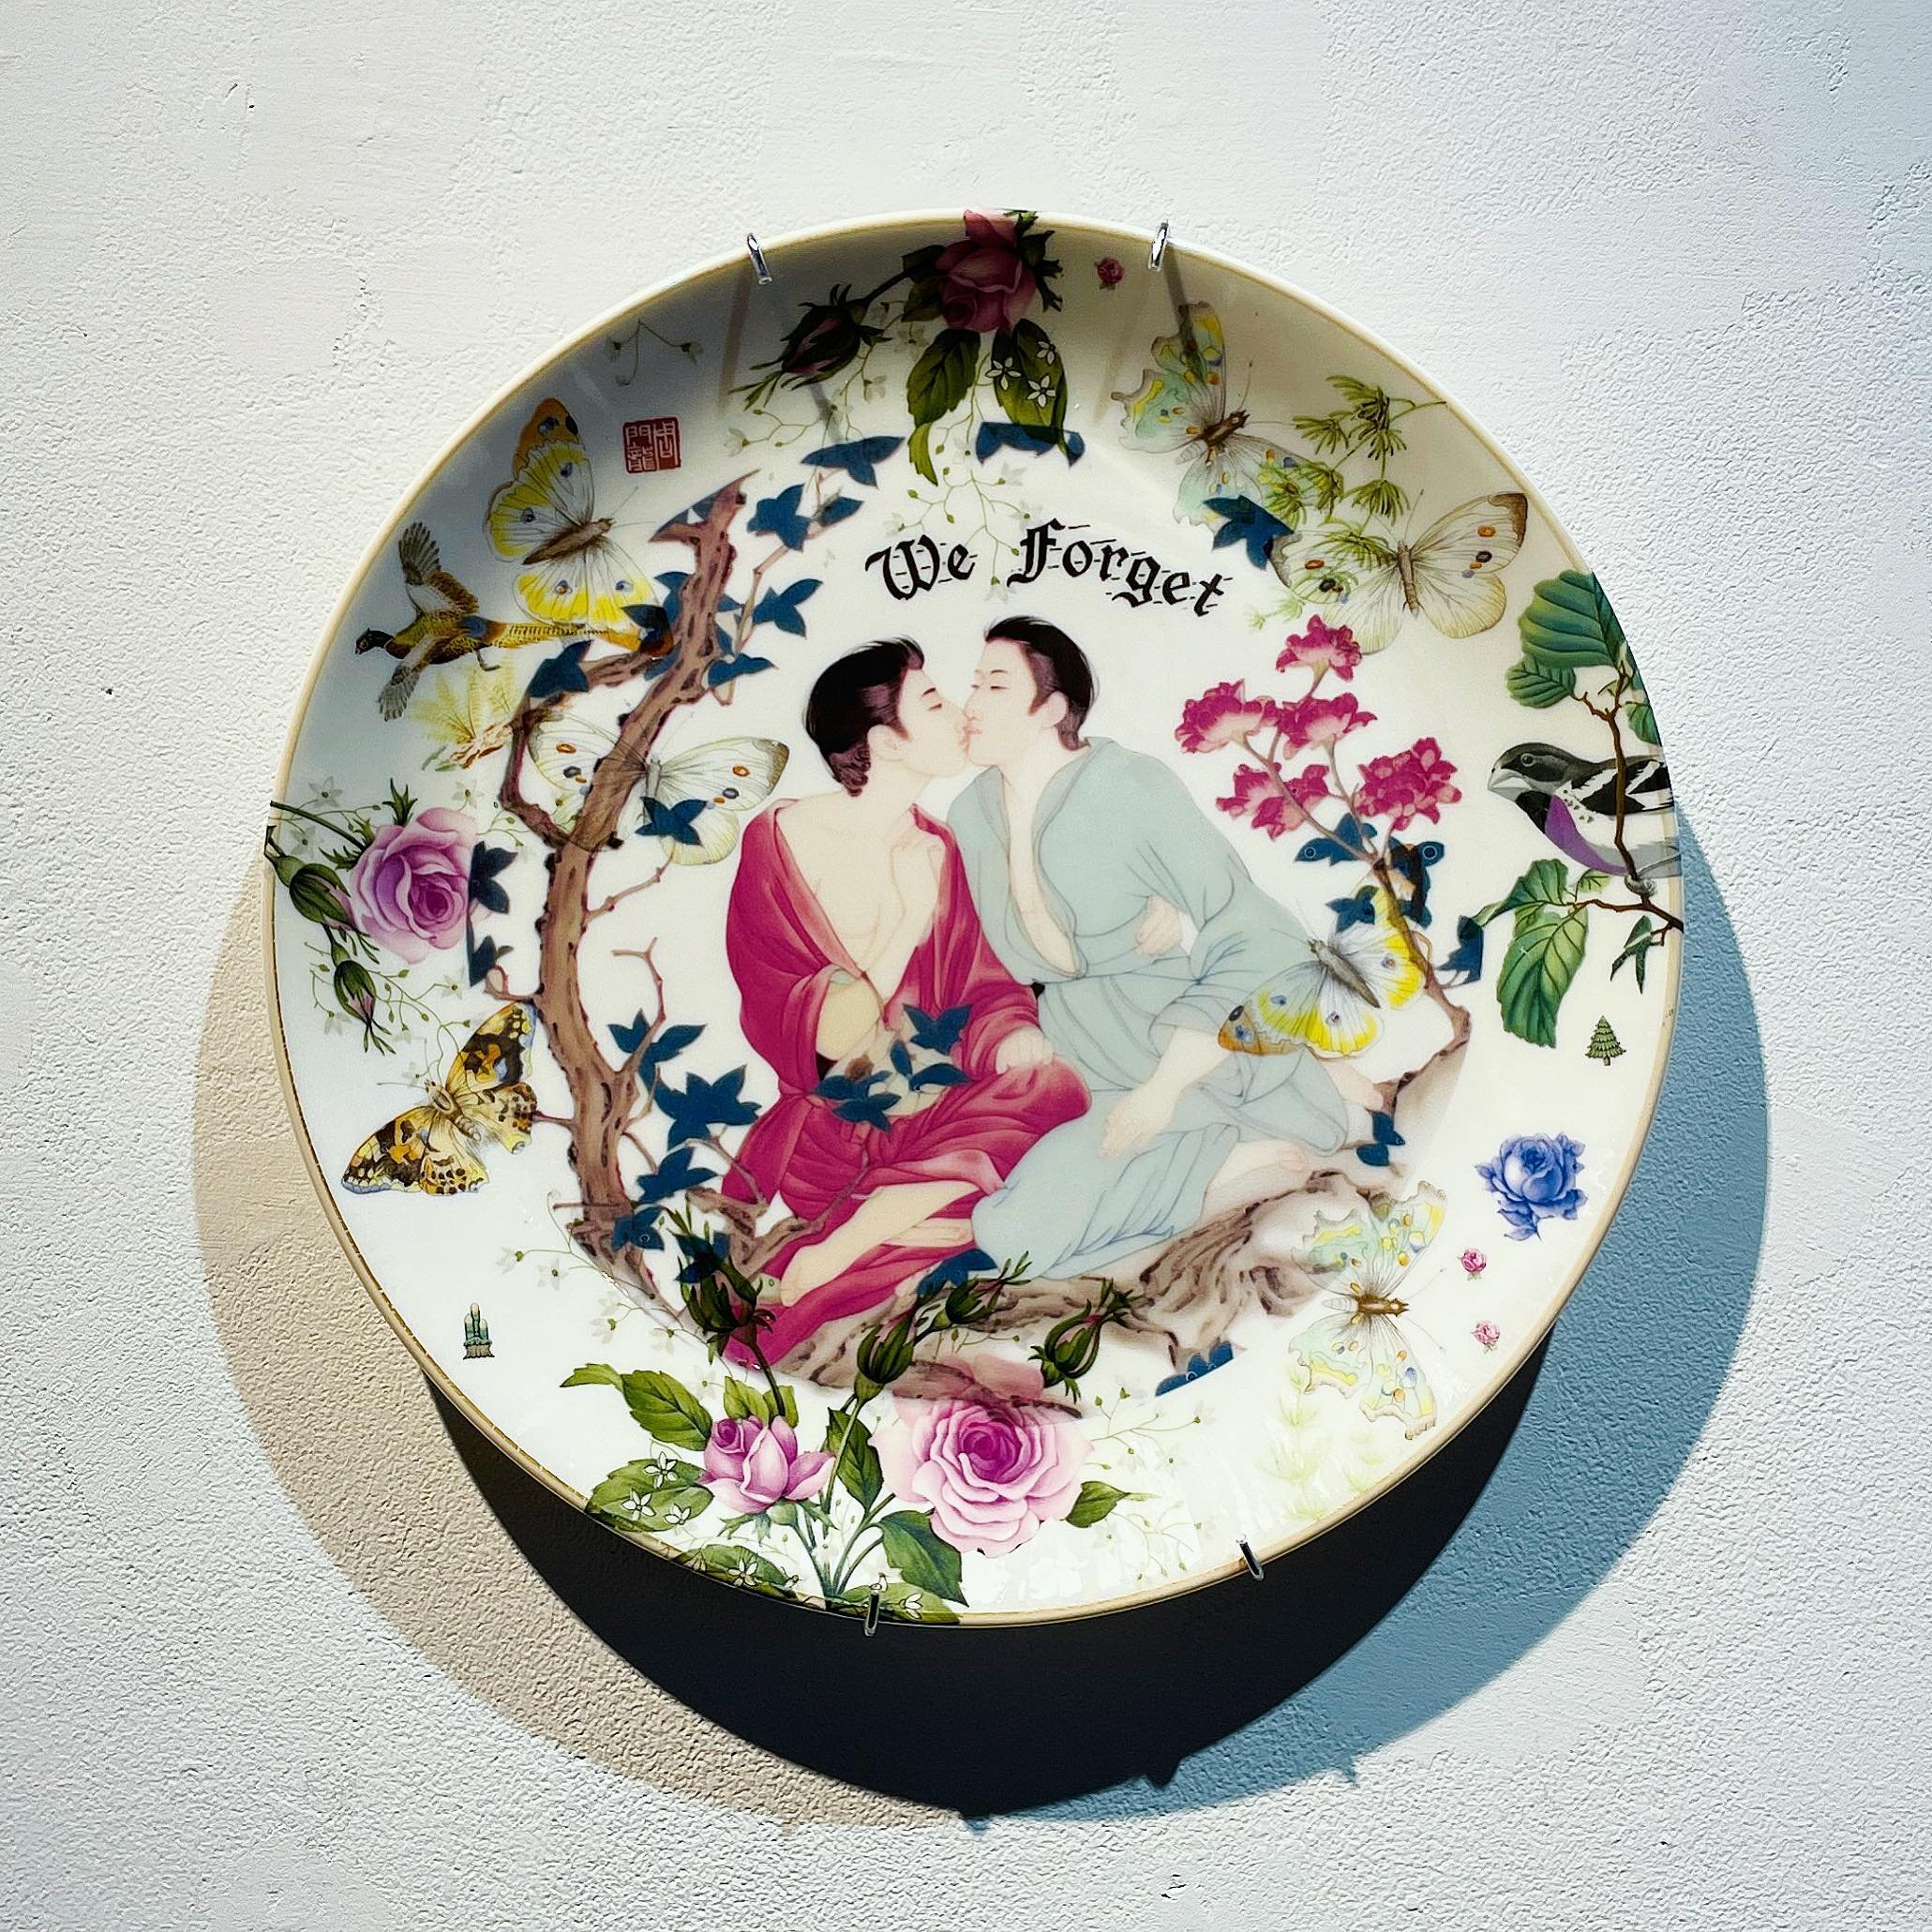 Pride weekend in Northampton - This plate is at @apearts as part of the PLATITUDE exhibit. I was honored to receive decals from Howard Kottler&rsquo;s estate and made a collaborative piece using AI imagery (something that I think Howard would have be